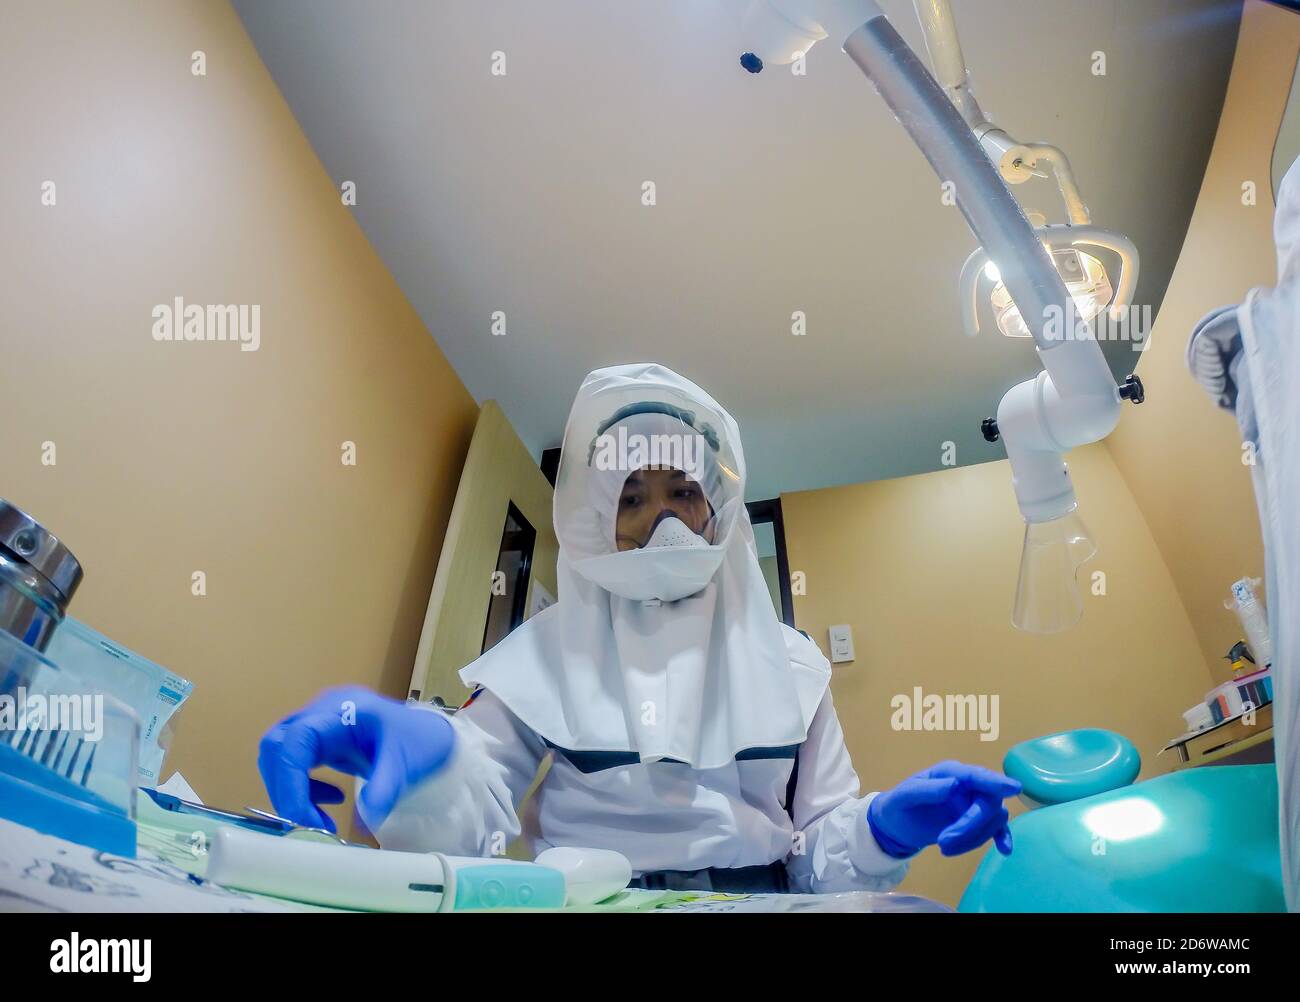 Manila, Philippines. 19th Oct, 2020. Dr. Maureen P. Ines-Manzano, a dentist, prepares her dental equipment while wearing a powered air-purifying respirator (PAPR) suit inside her clinic in Manila, the Philippines, on Oct. 19, 2020. Patients of Dr. Manzano has dubbed her the 'astronaut dentist' because of her resemblance to a spacewoman while wearing her PAPR suit to protect her patients and herself from the COVID-19 disease. Credit: Rouelle Umali/Xinhua/Alamy Live News Stock Photo